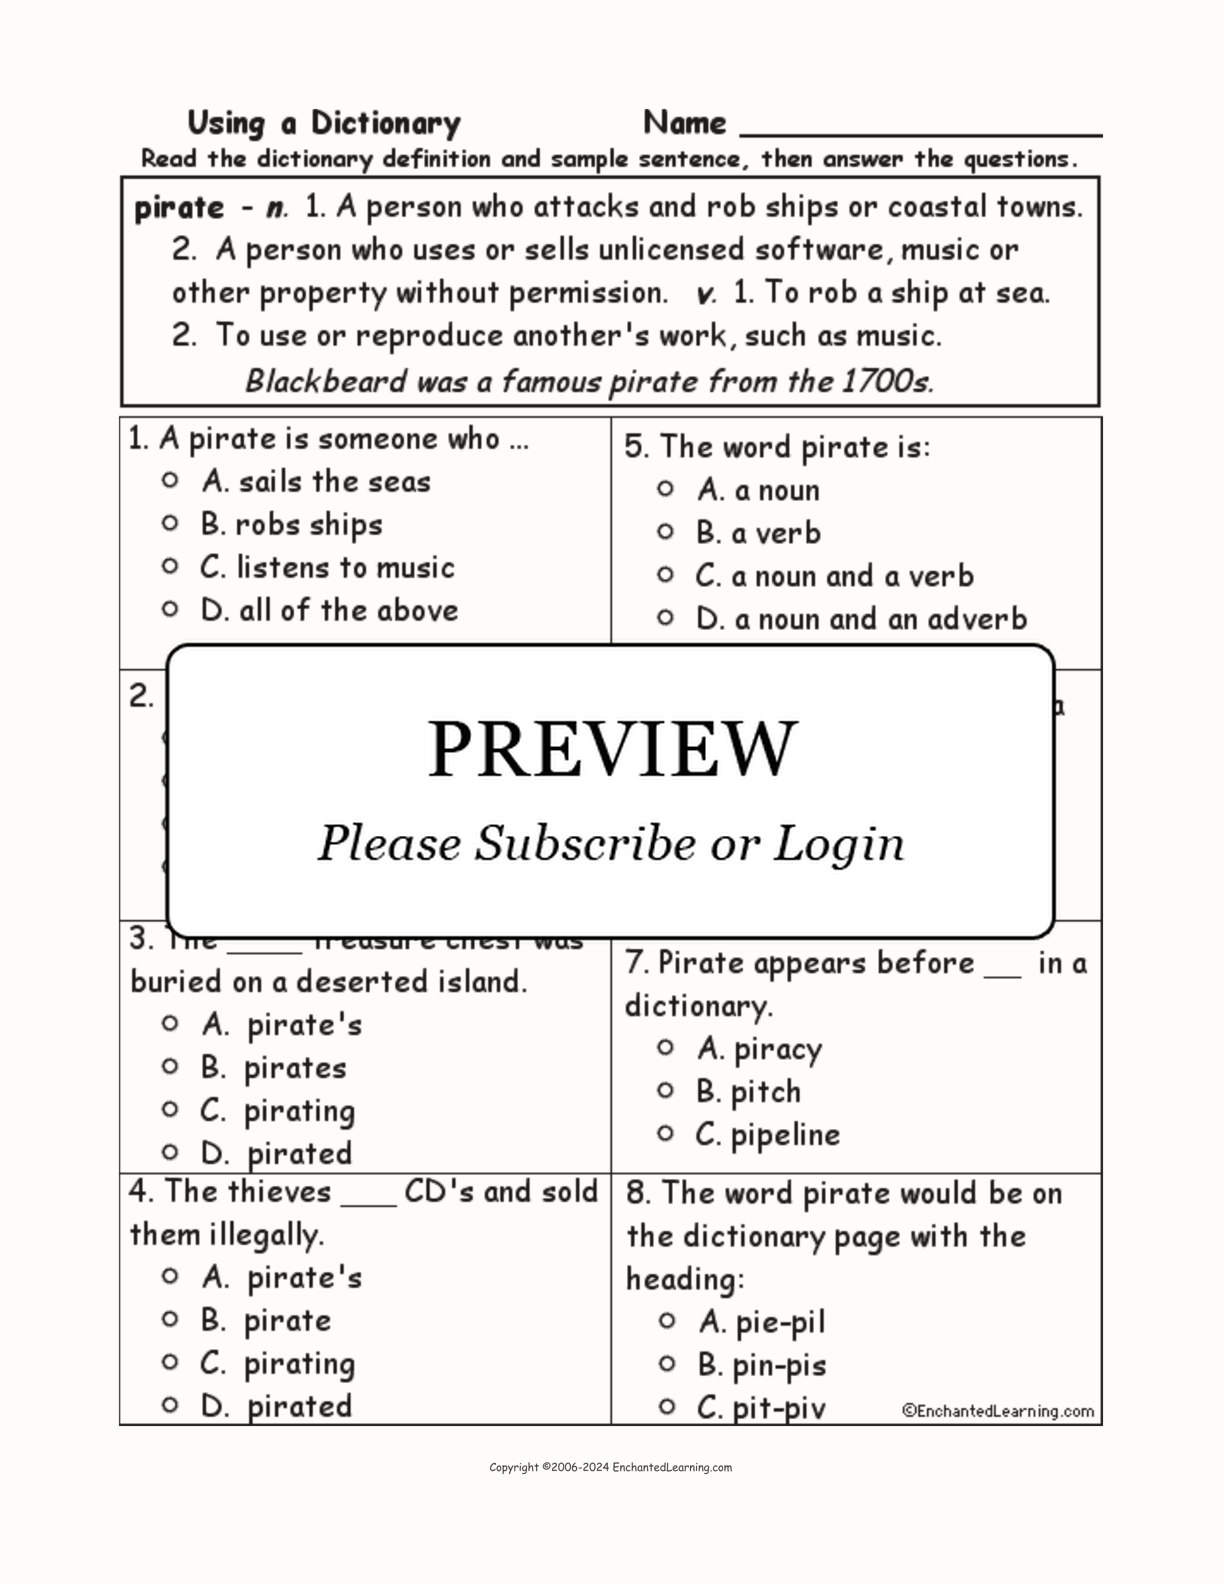 Pirate Definition - Multiple Choice Comprehension Quiz interactive worksheet page 1